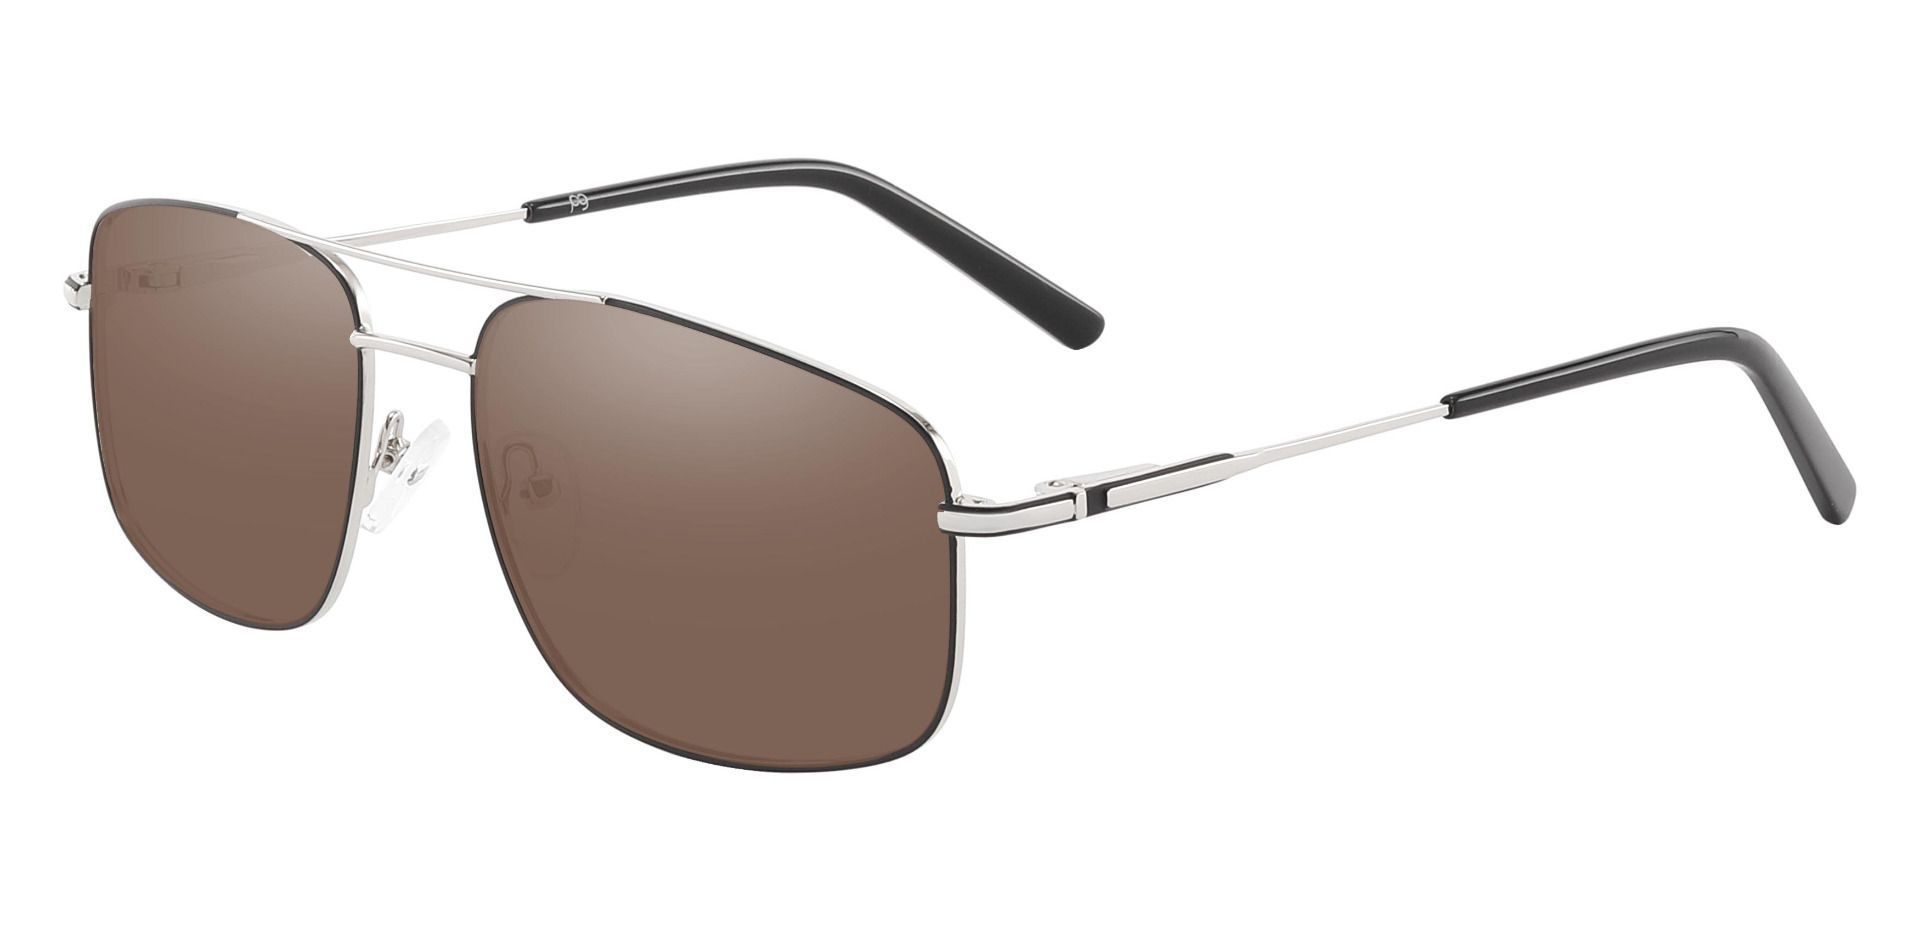 Turner Aviator Reading Sunglasses - Silver Frame With Brown Lenses